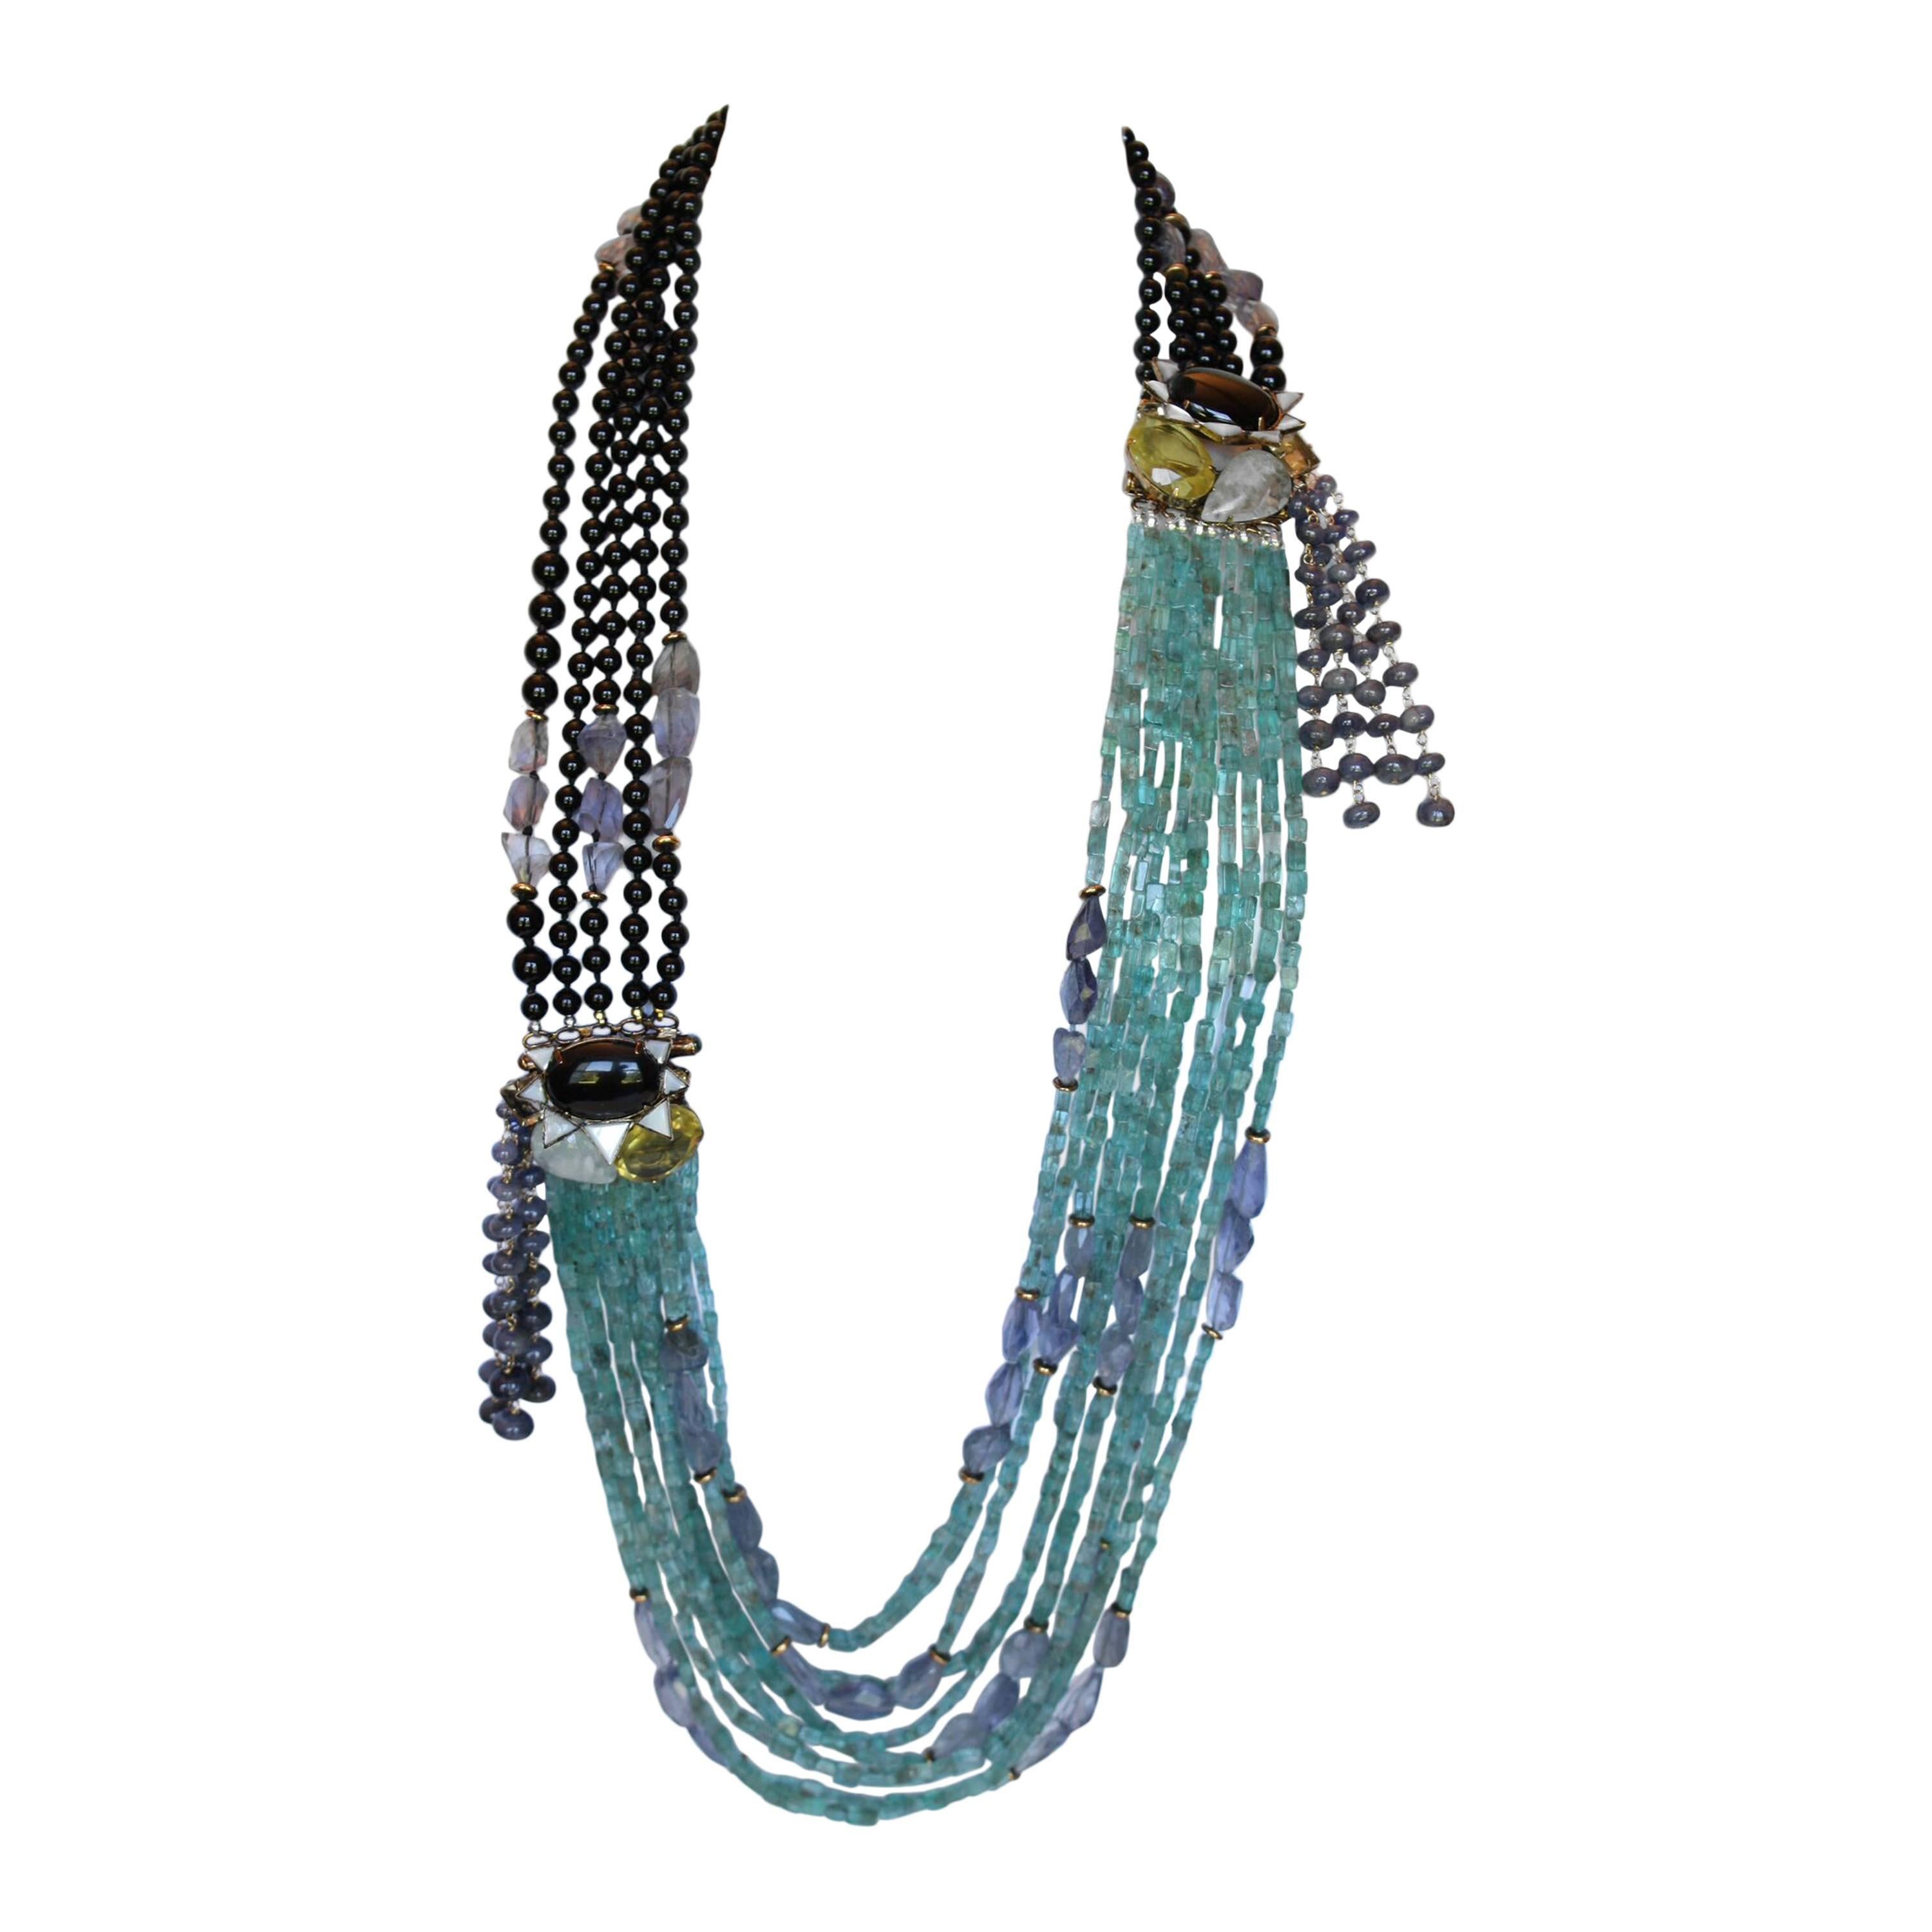 Iradj Moini Apatite & Iolite Necklace with Onyx and Mother of Pearl Details